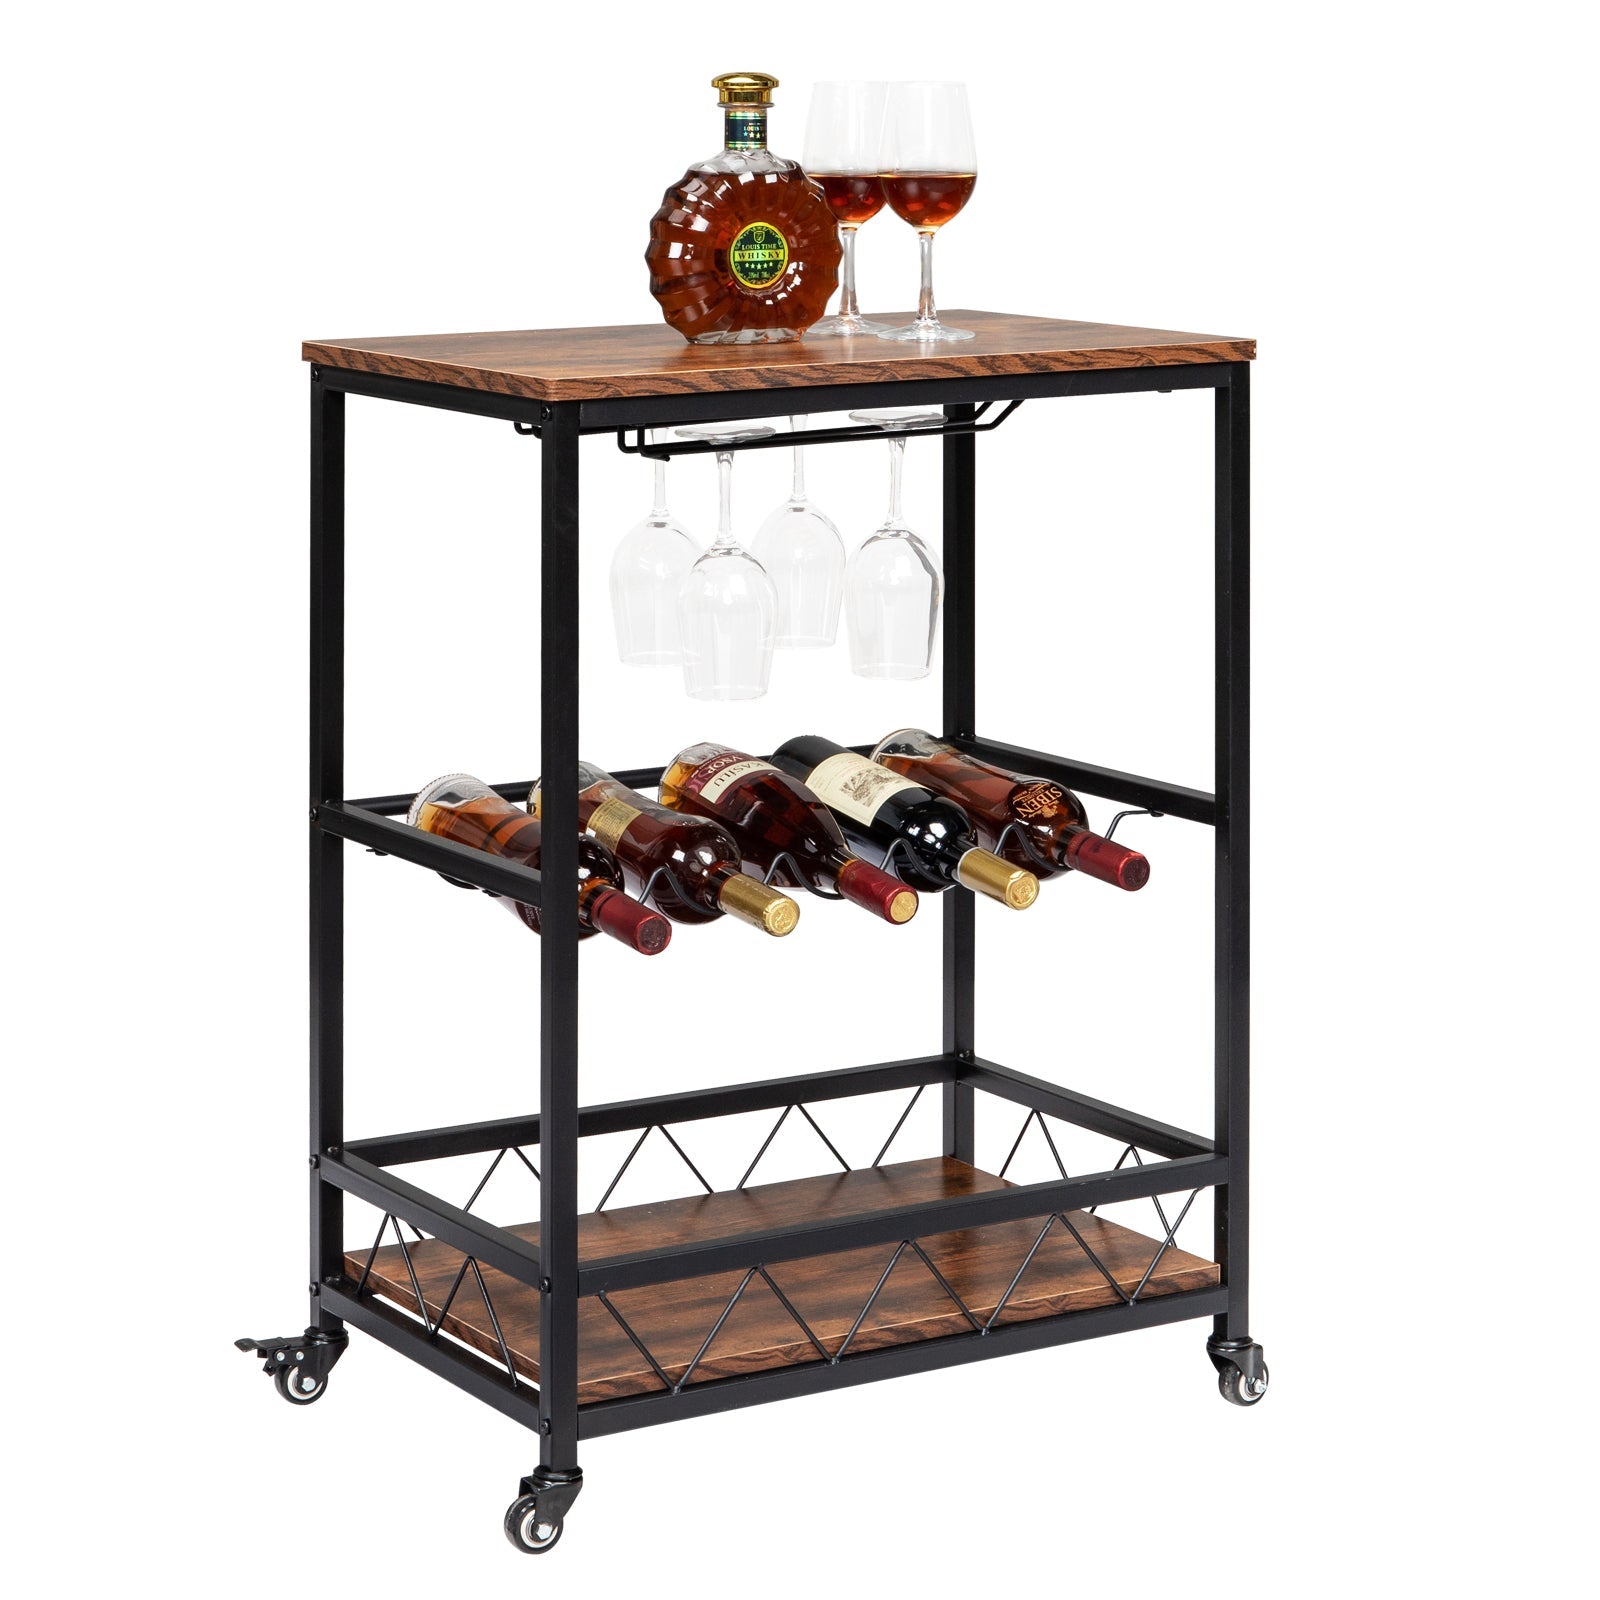 Mobile Kitchen Trolley Cart on Wheels, with 2 Glass Holders & 5 Bottle Rack - TovaHaus